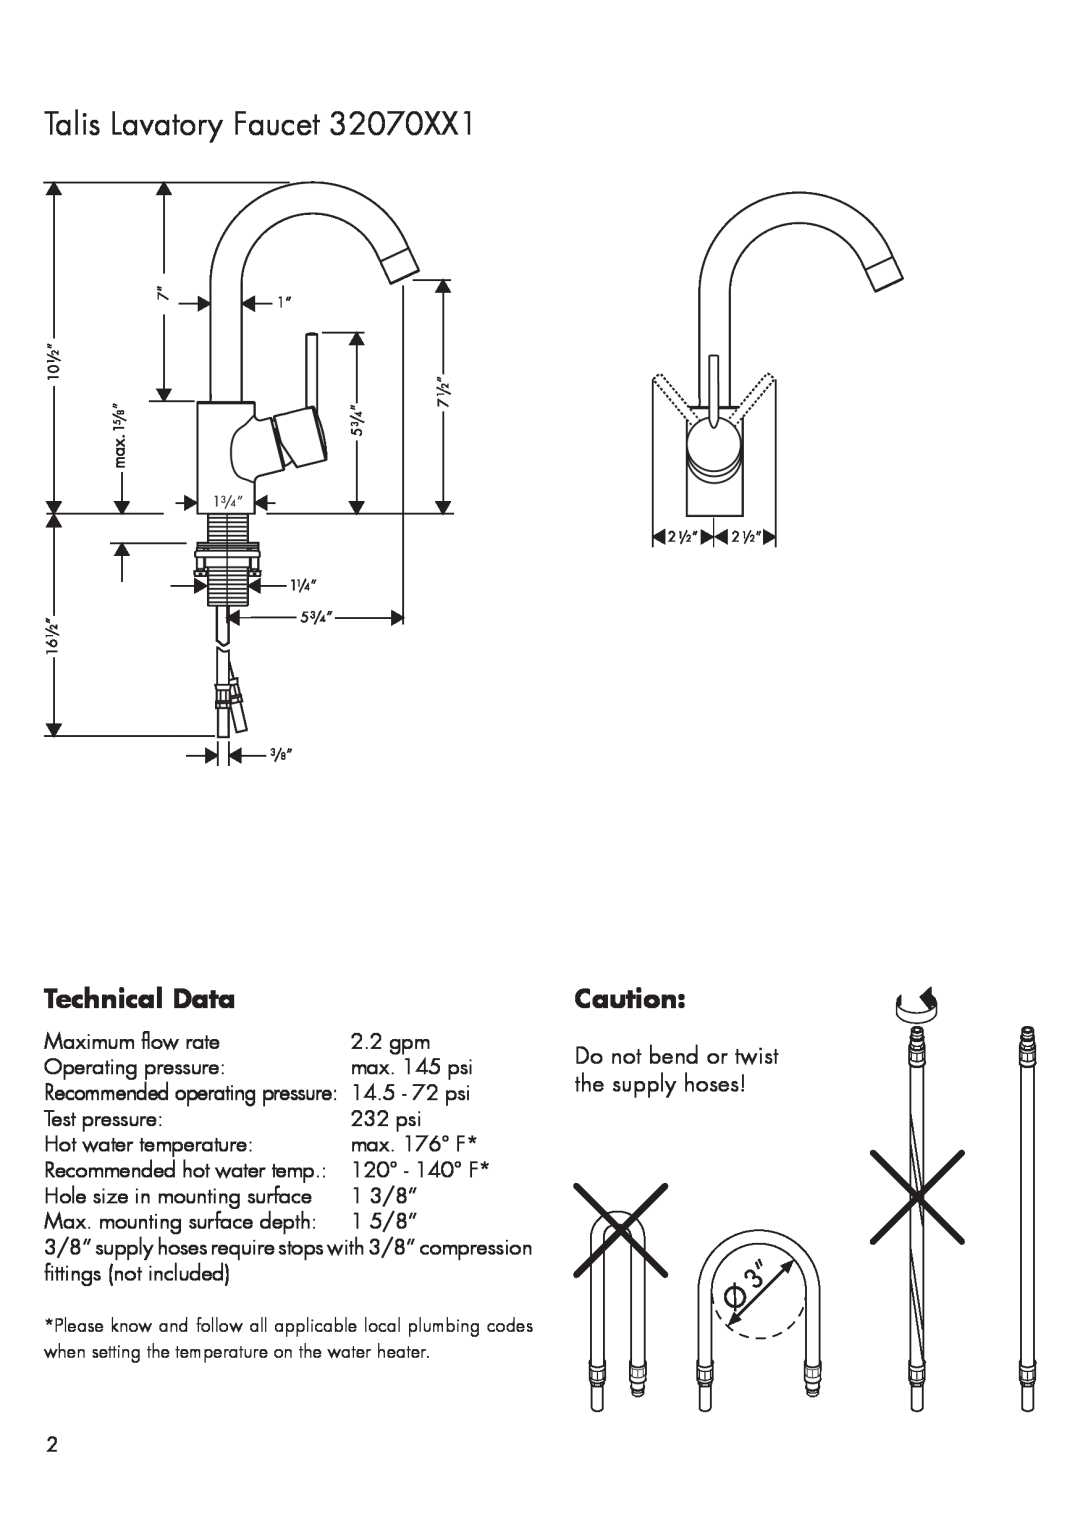 Hans Grohe 32070XX1 installation instructions Technical Data, Talis Lavatory Faucet 